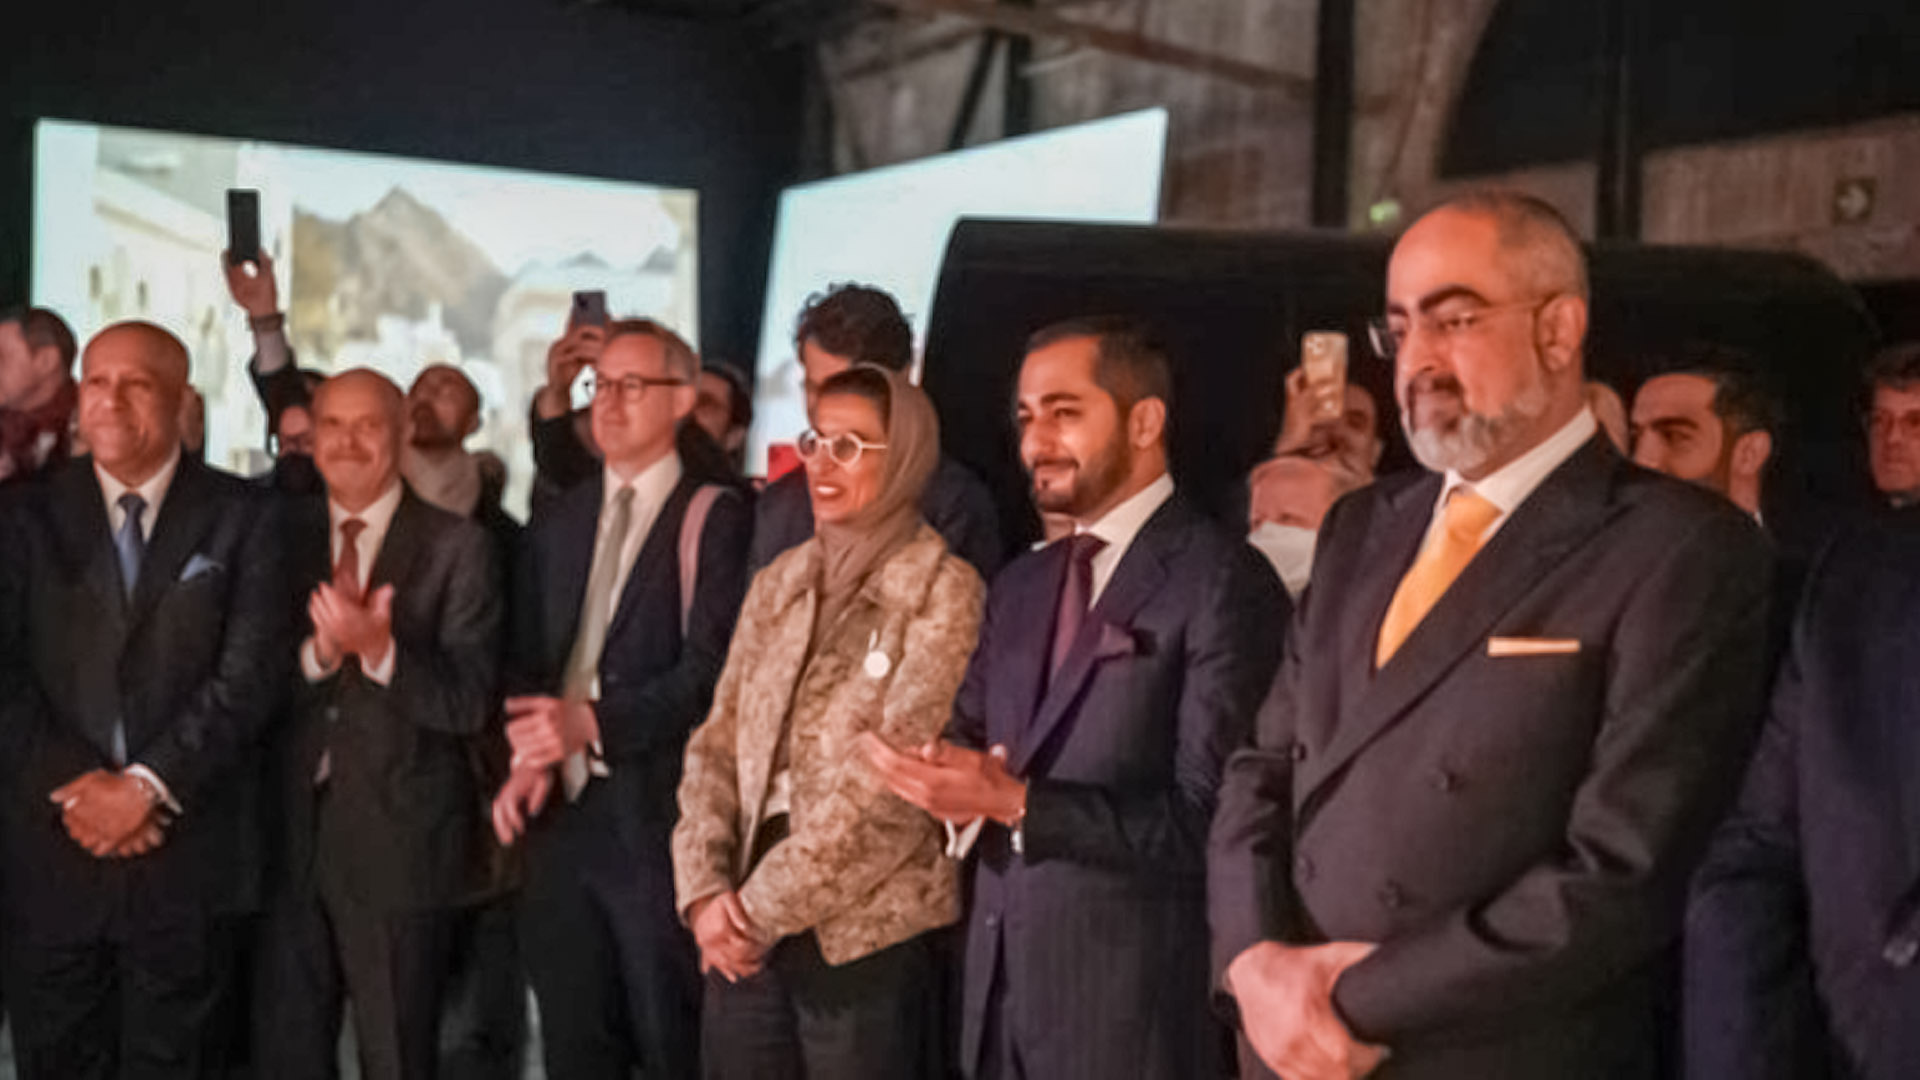 Oman Pavilion at Venice Biennale inaugurated by HH Sayyid Theyazin